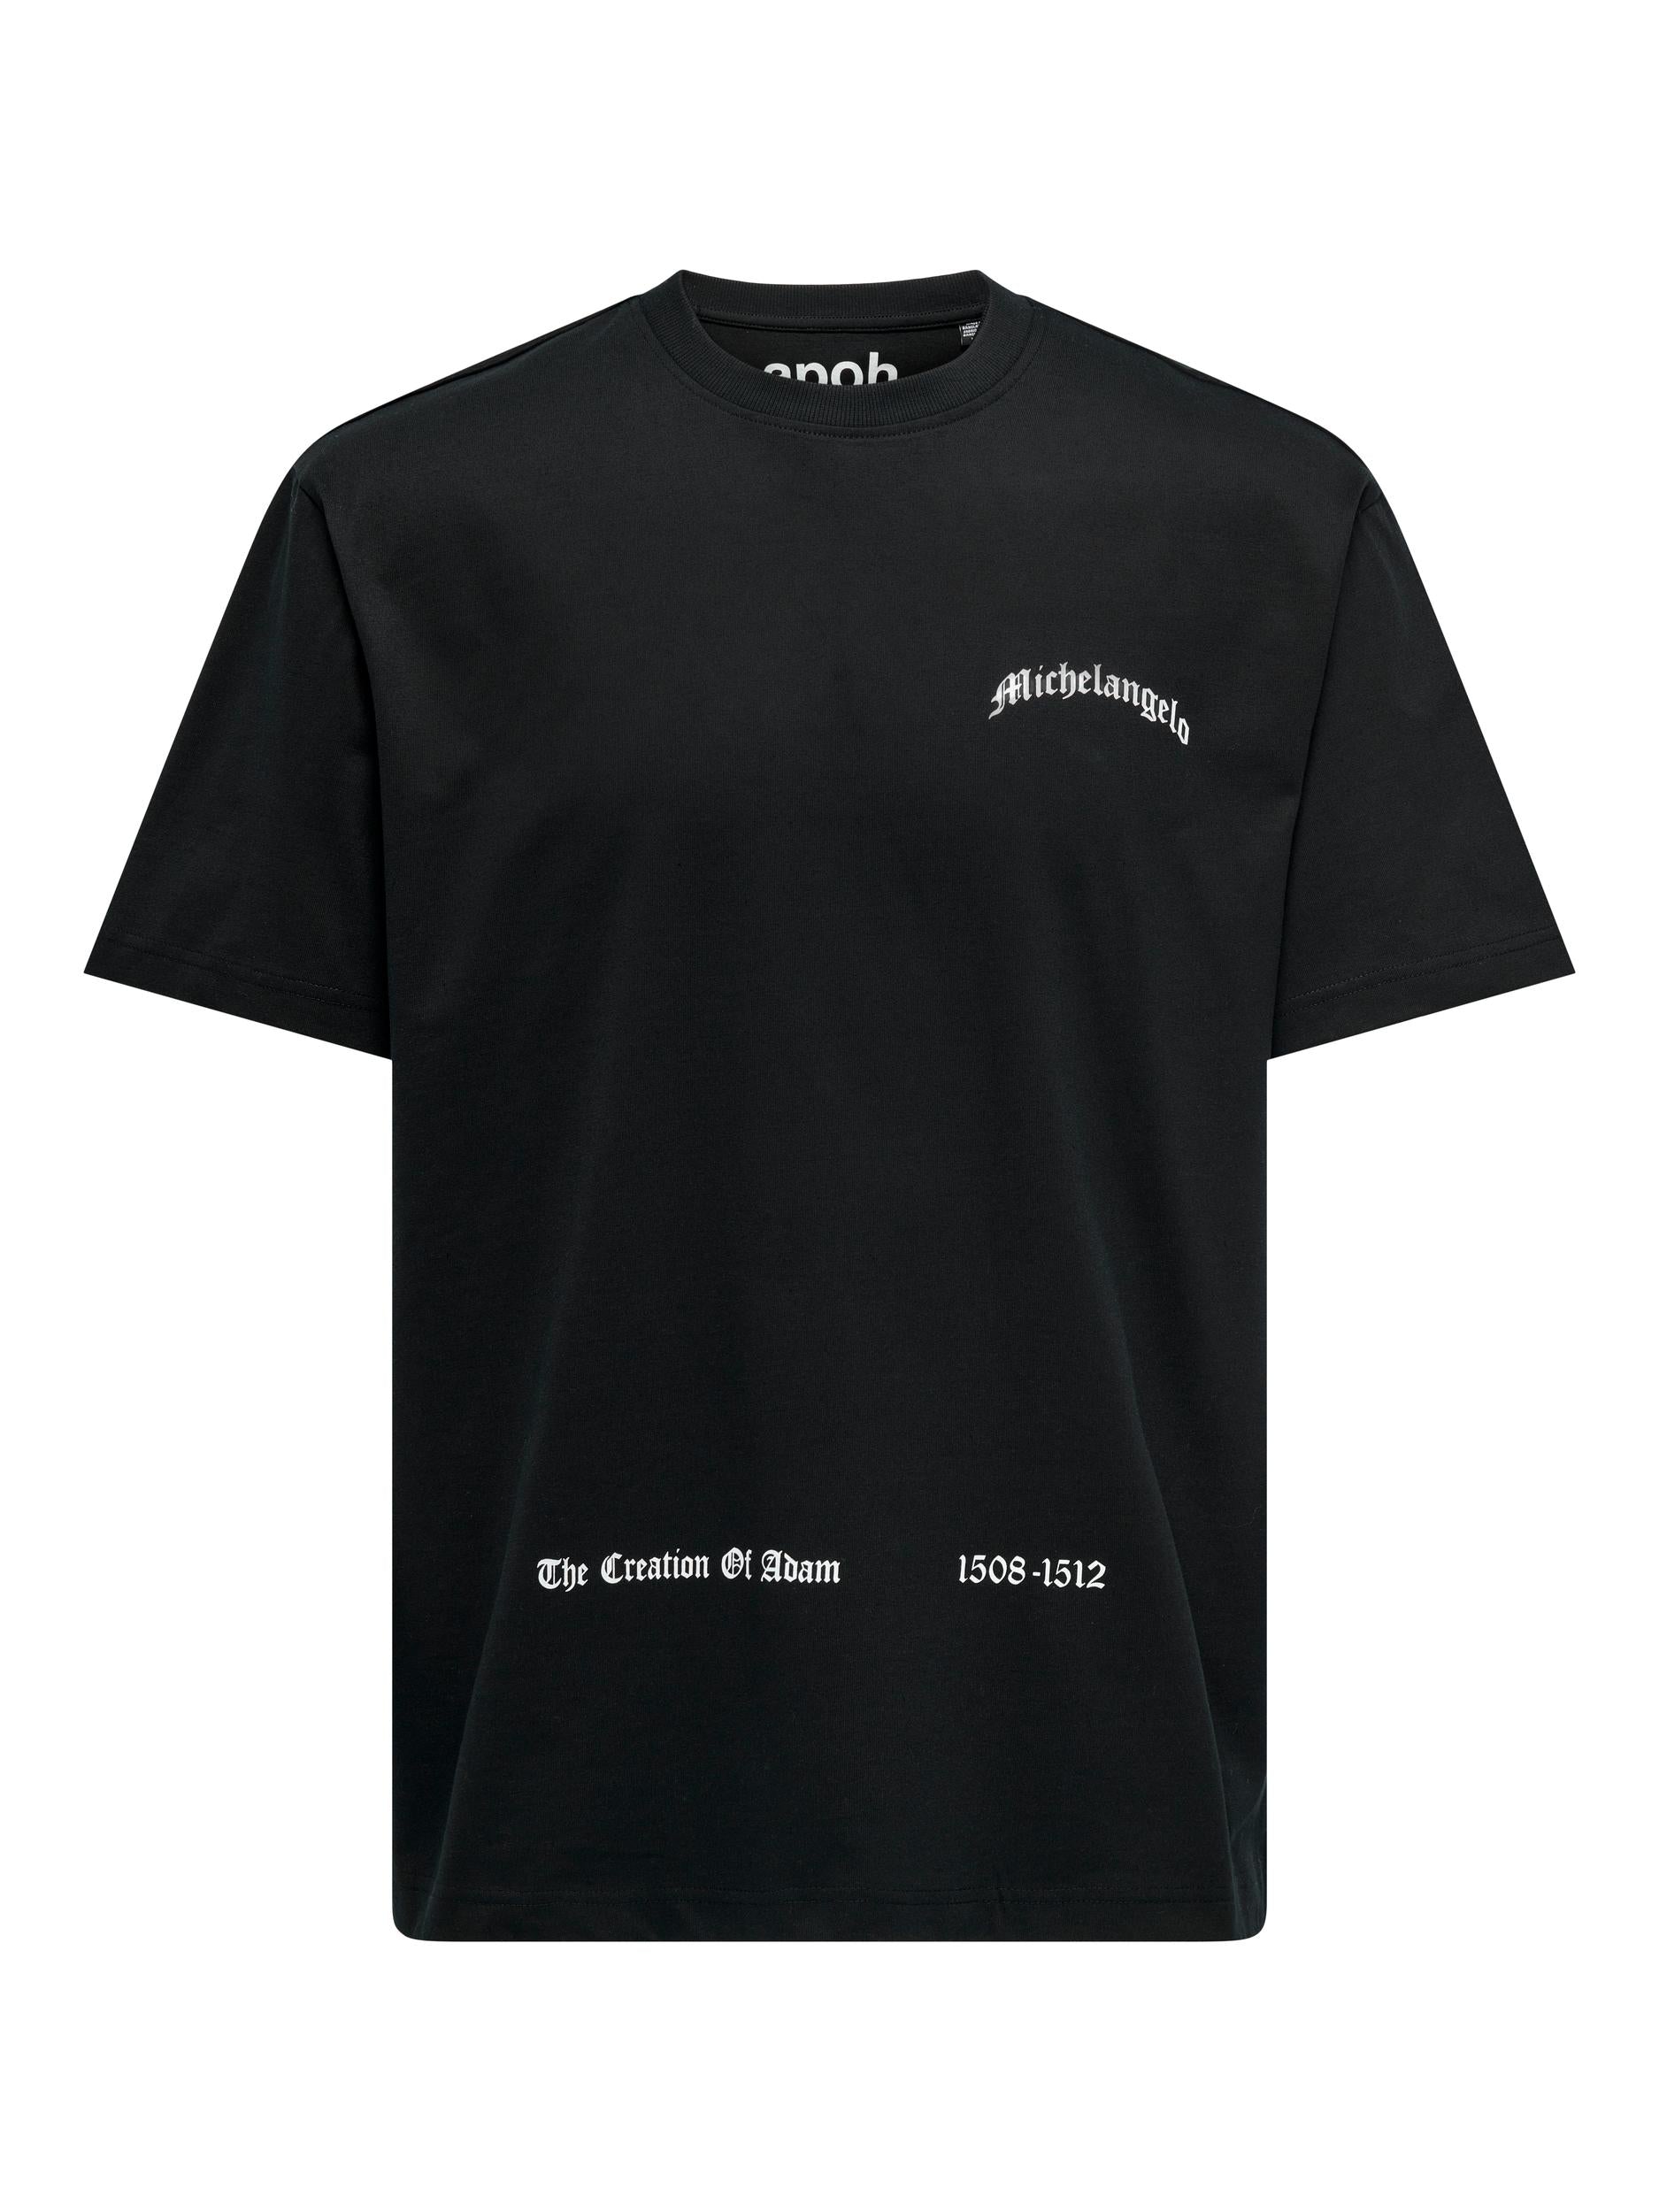 Apoh Life Rlx Ss Tee - Black - The Sons online